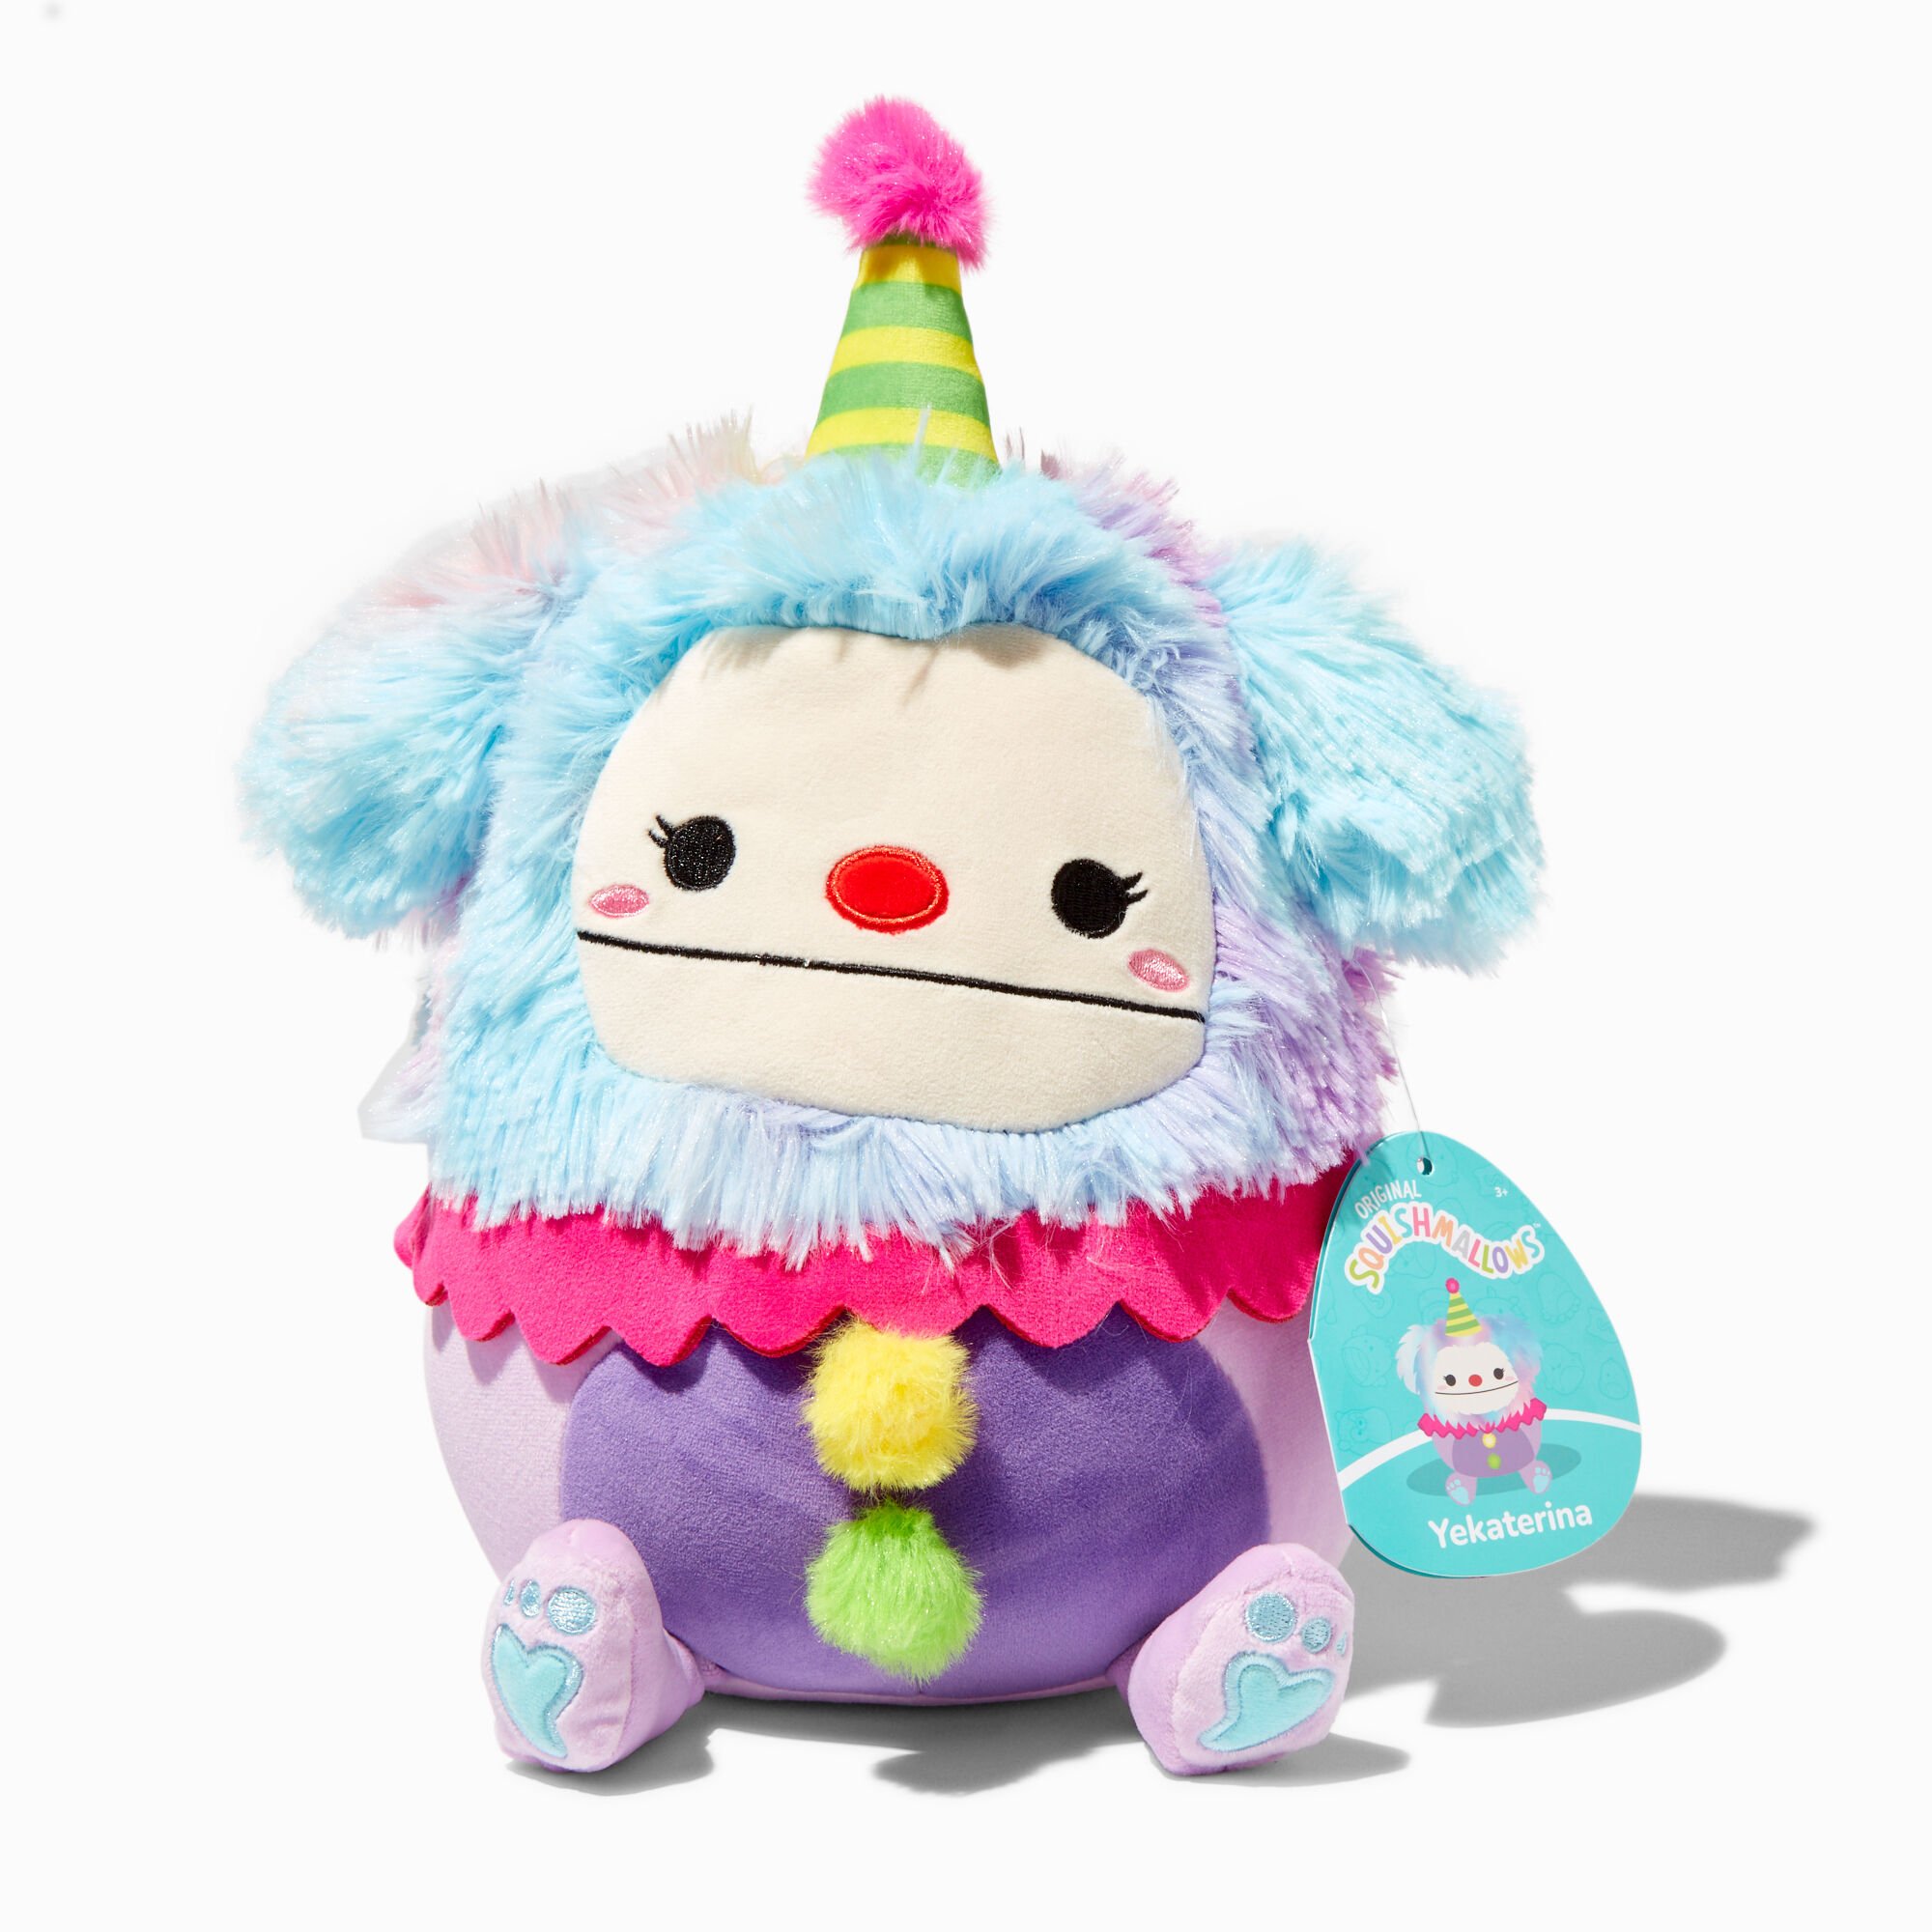 View Claires Squishmallows 8 Yekaterina Bigfoot Clown Plush Toy information